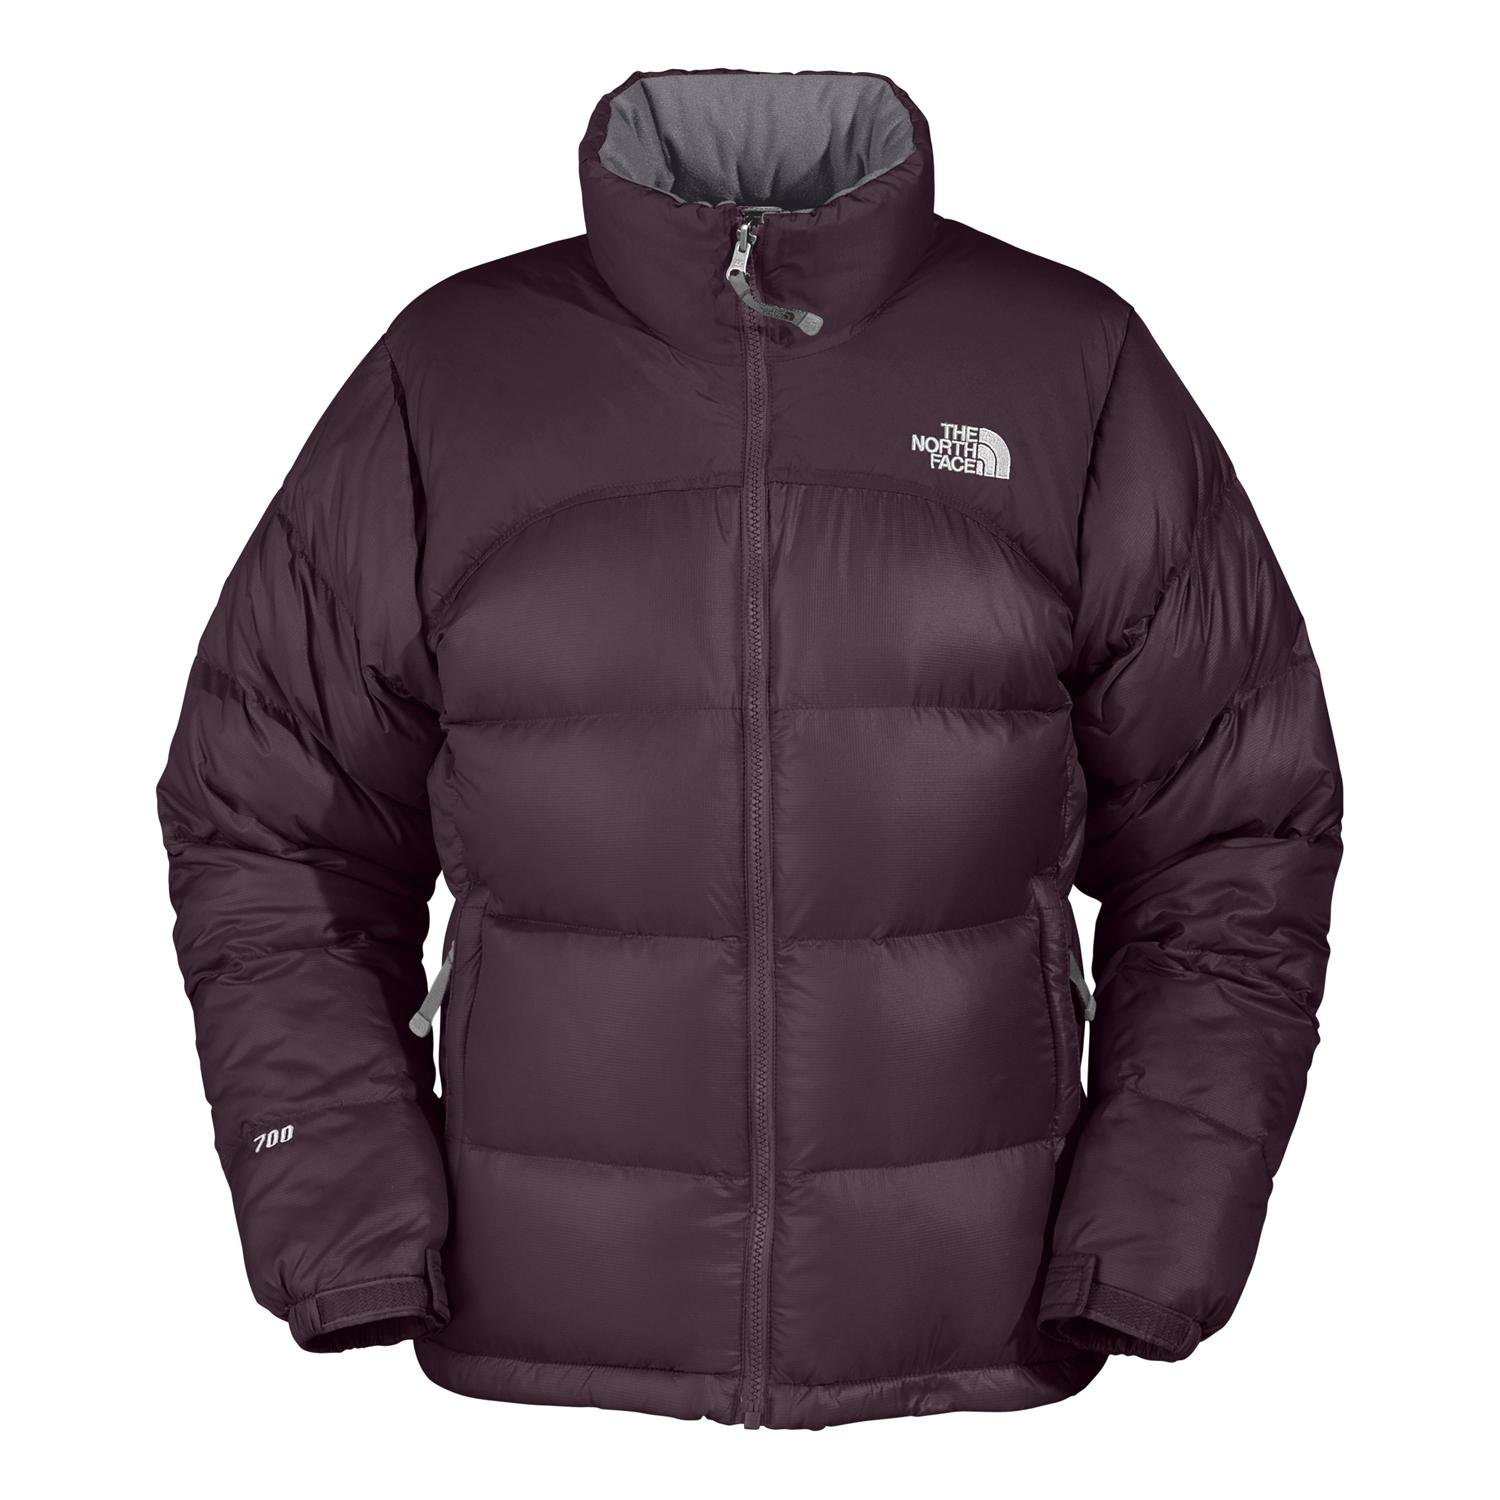 The North Face Nuptse Down Jacket - Women's | evo outlet